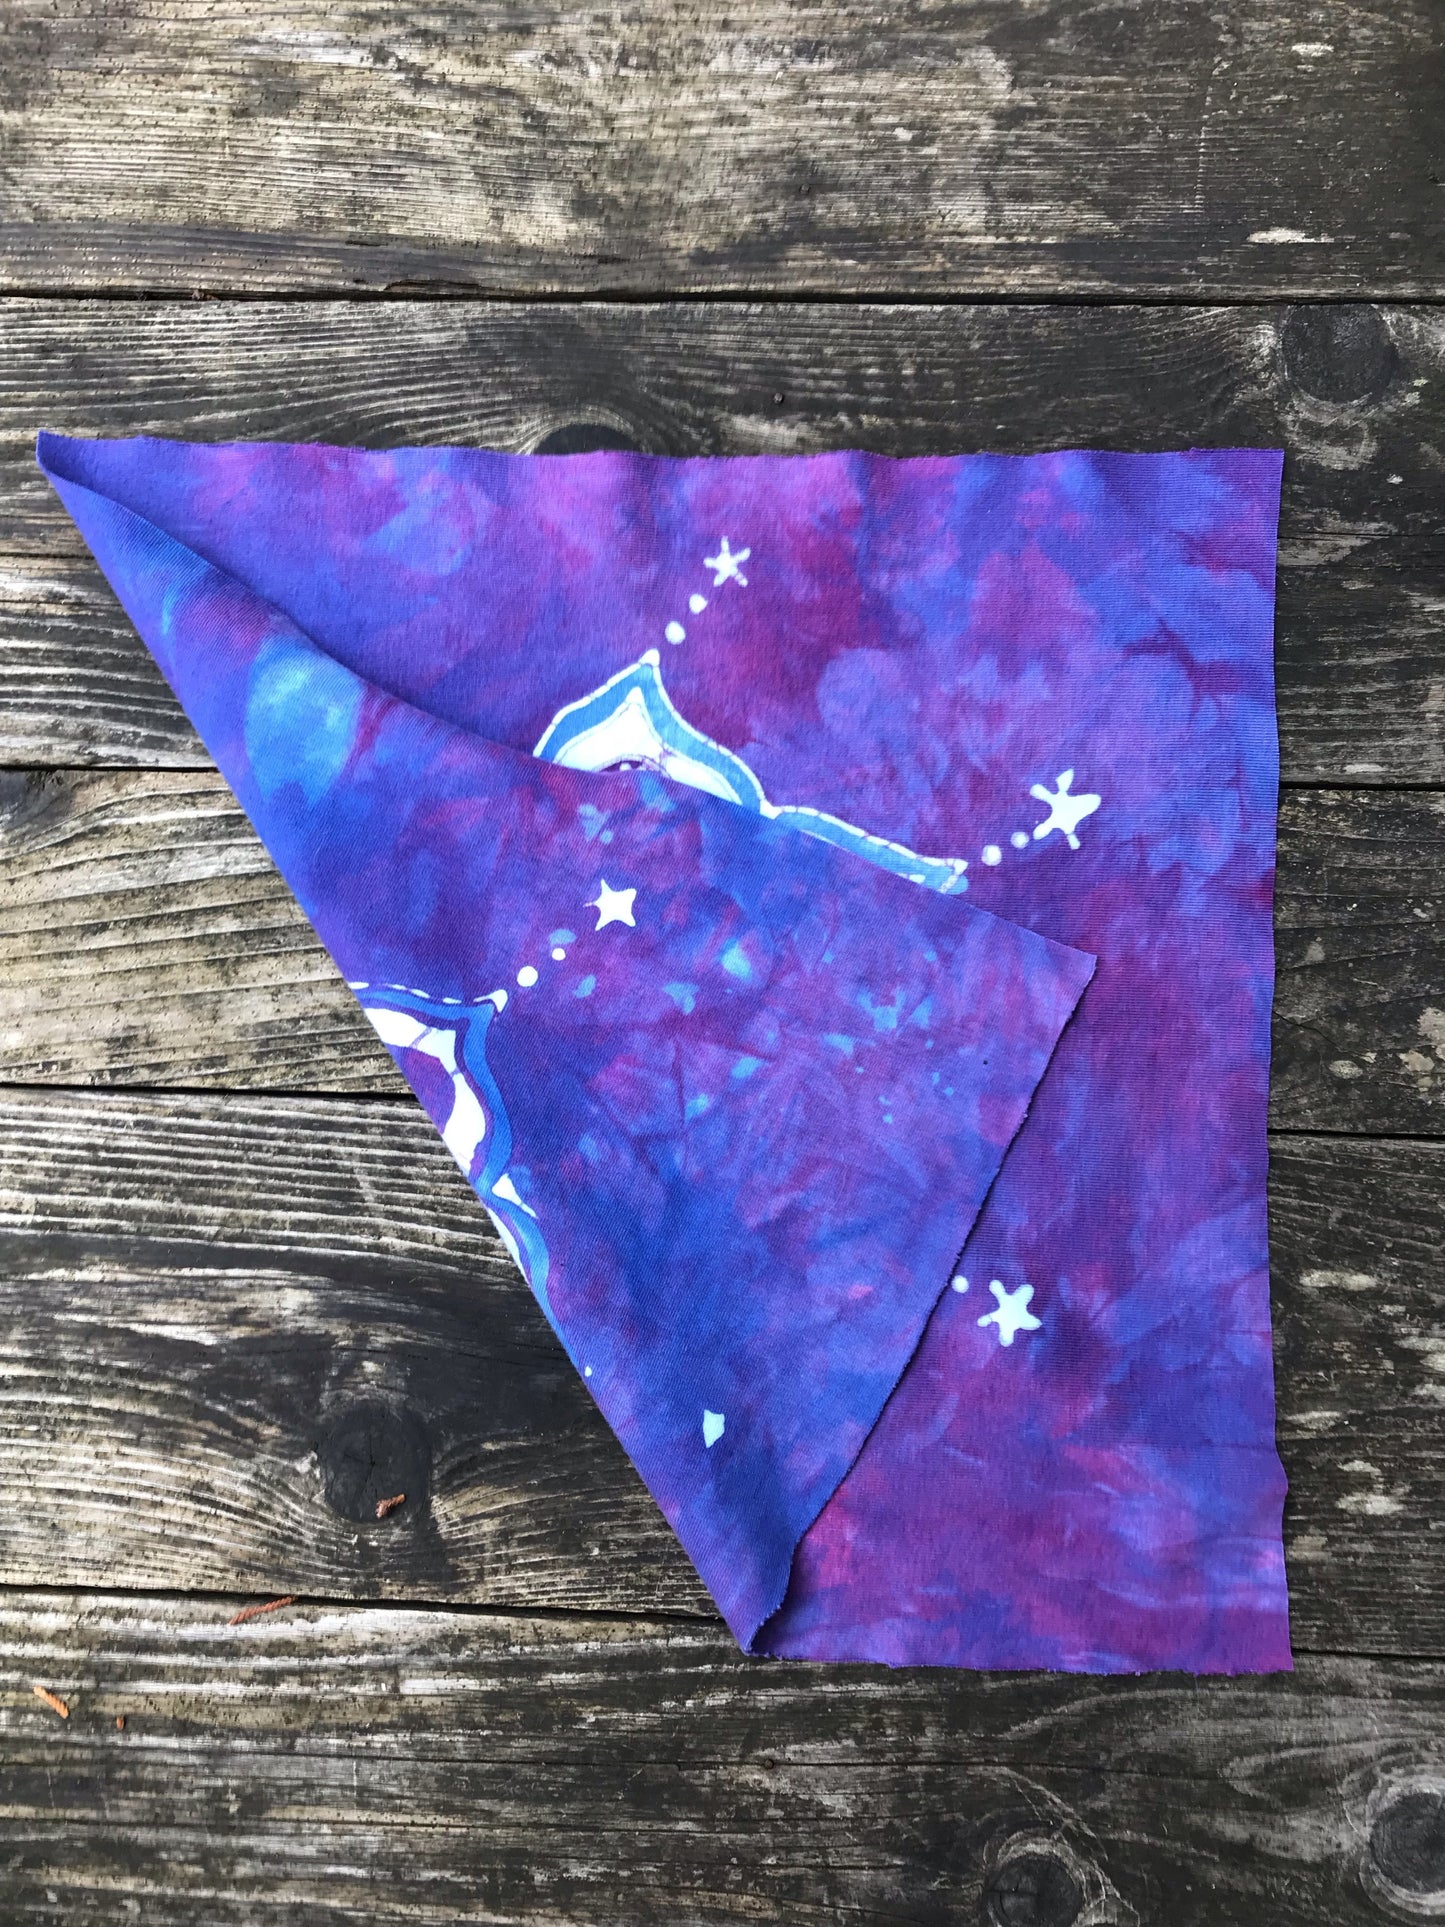 Hand Painted Batik Fabric Square - Swirling Star Flower in Purple and Periwinkle Batikwalla by Victoria 